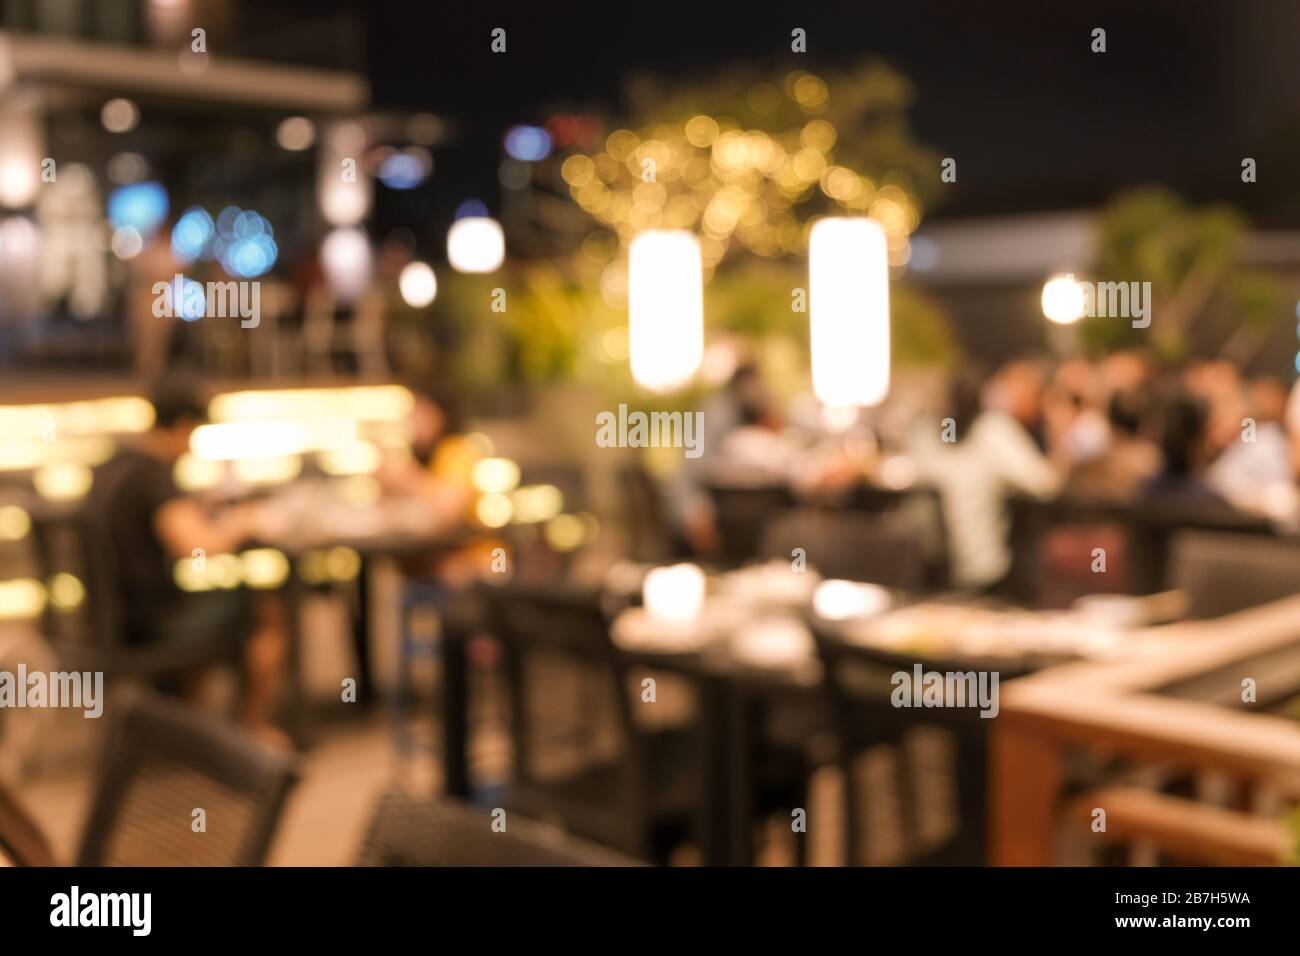 Abstract blur outdoor restaurant interior as background. Tables and chairs and beatiful vintage warm light bulb. Stock Photo